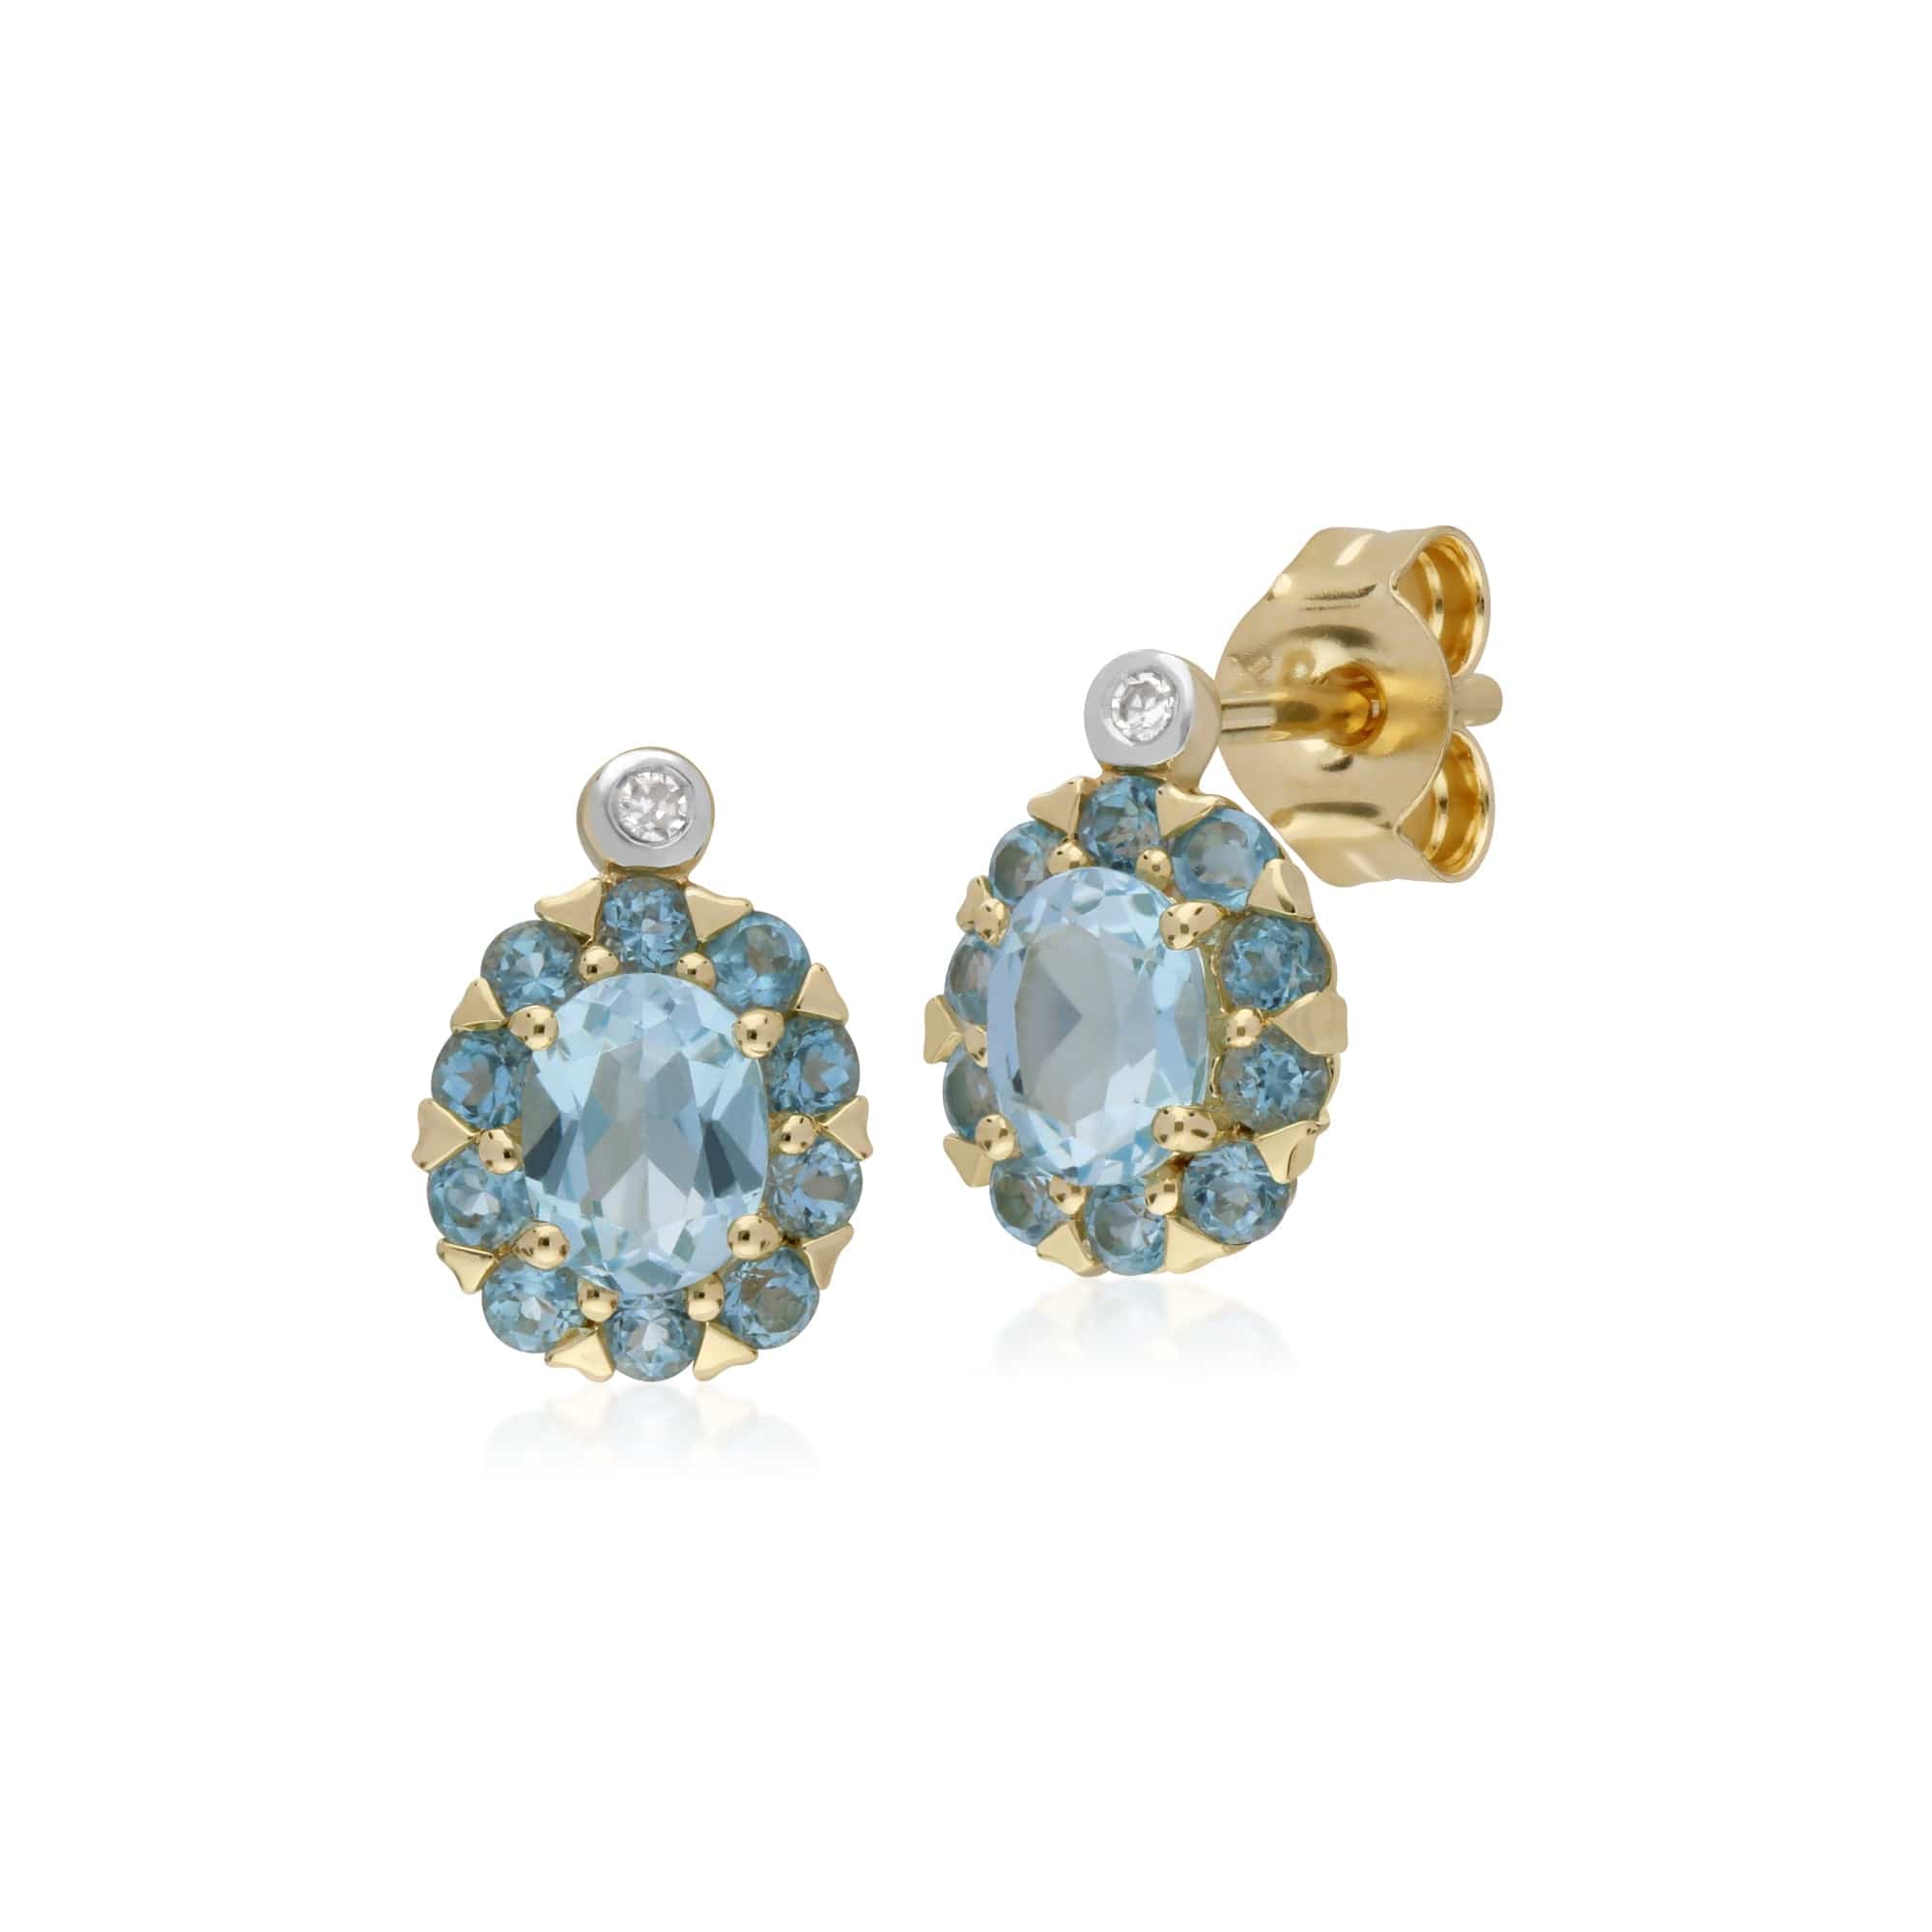 135E1572059-135P1912059 Classic Oval Blue Topaz & Diamond Cluster Stud Earrings & Pendant Set in 9ct Yellow Gold 2